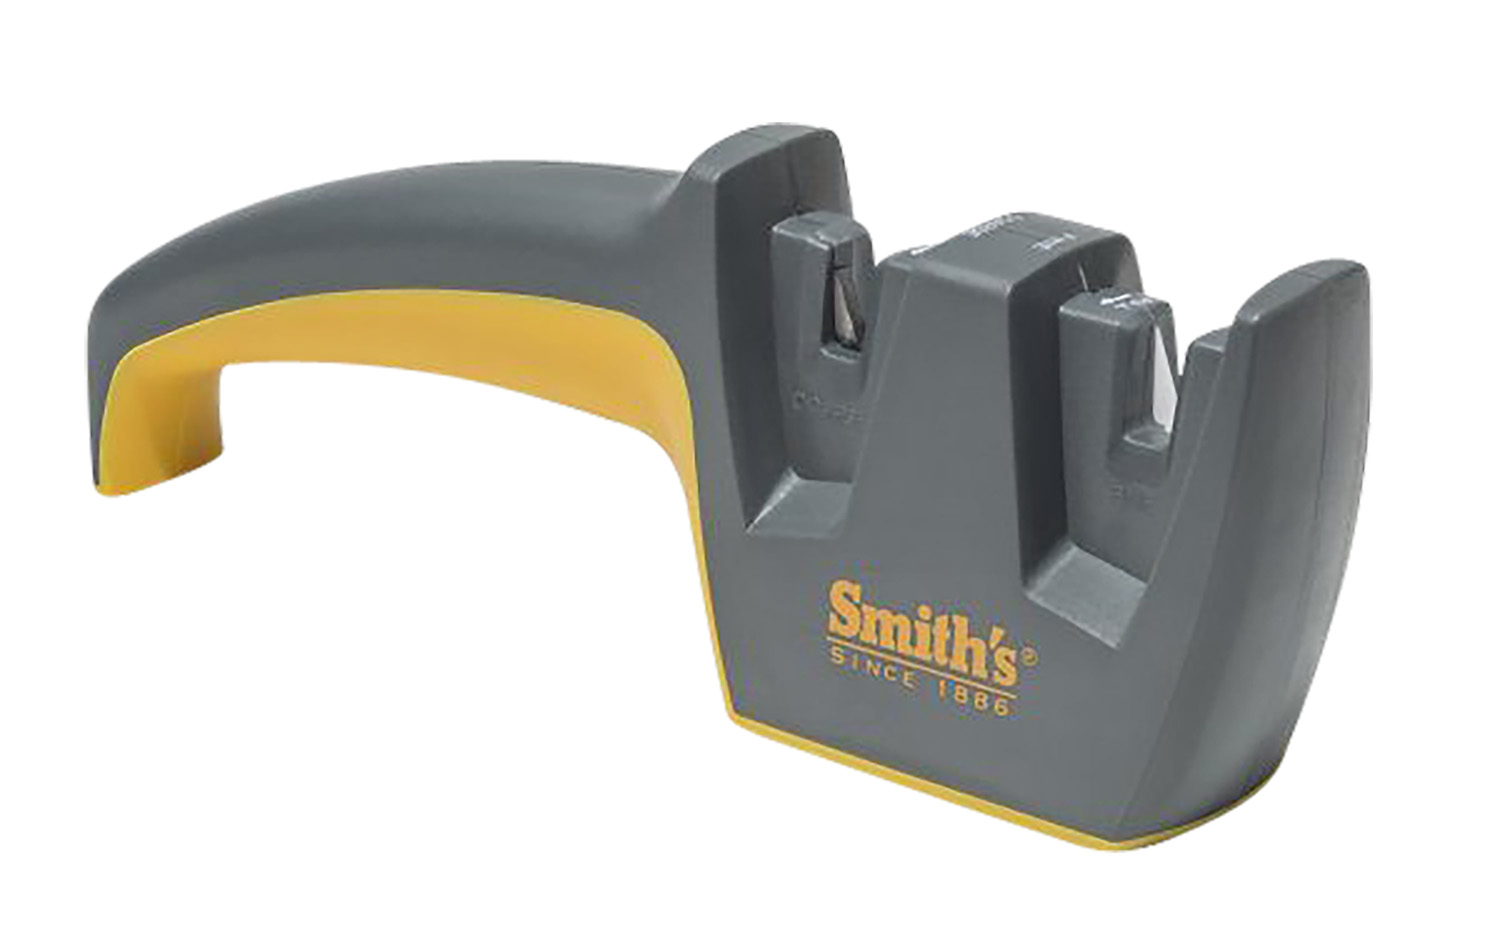 Smith's Consumer Products Store. BROADHEAD - SHARPENERS